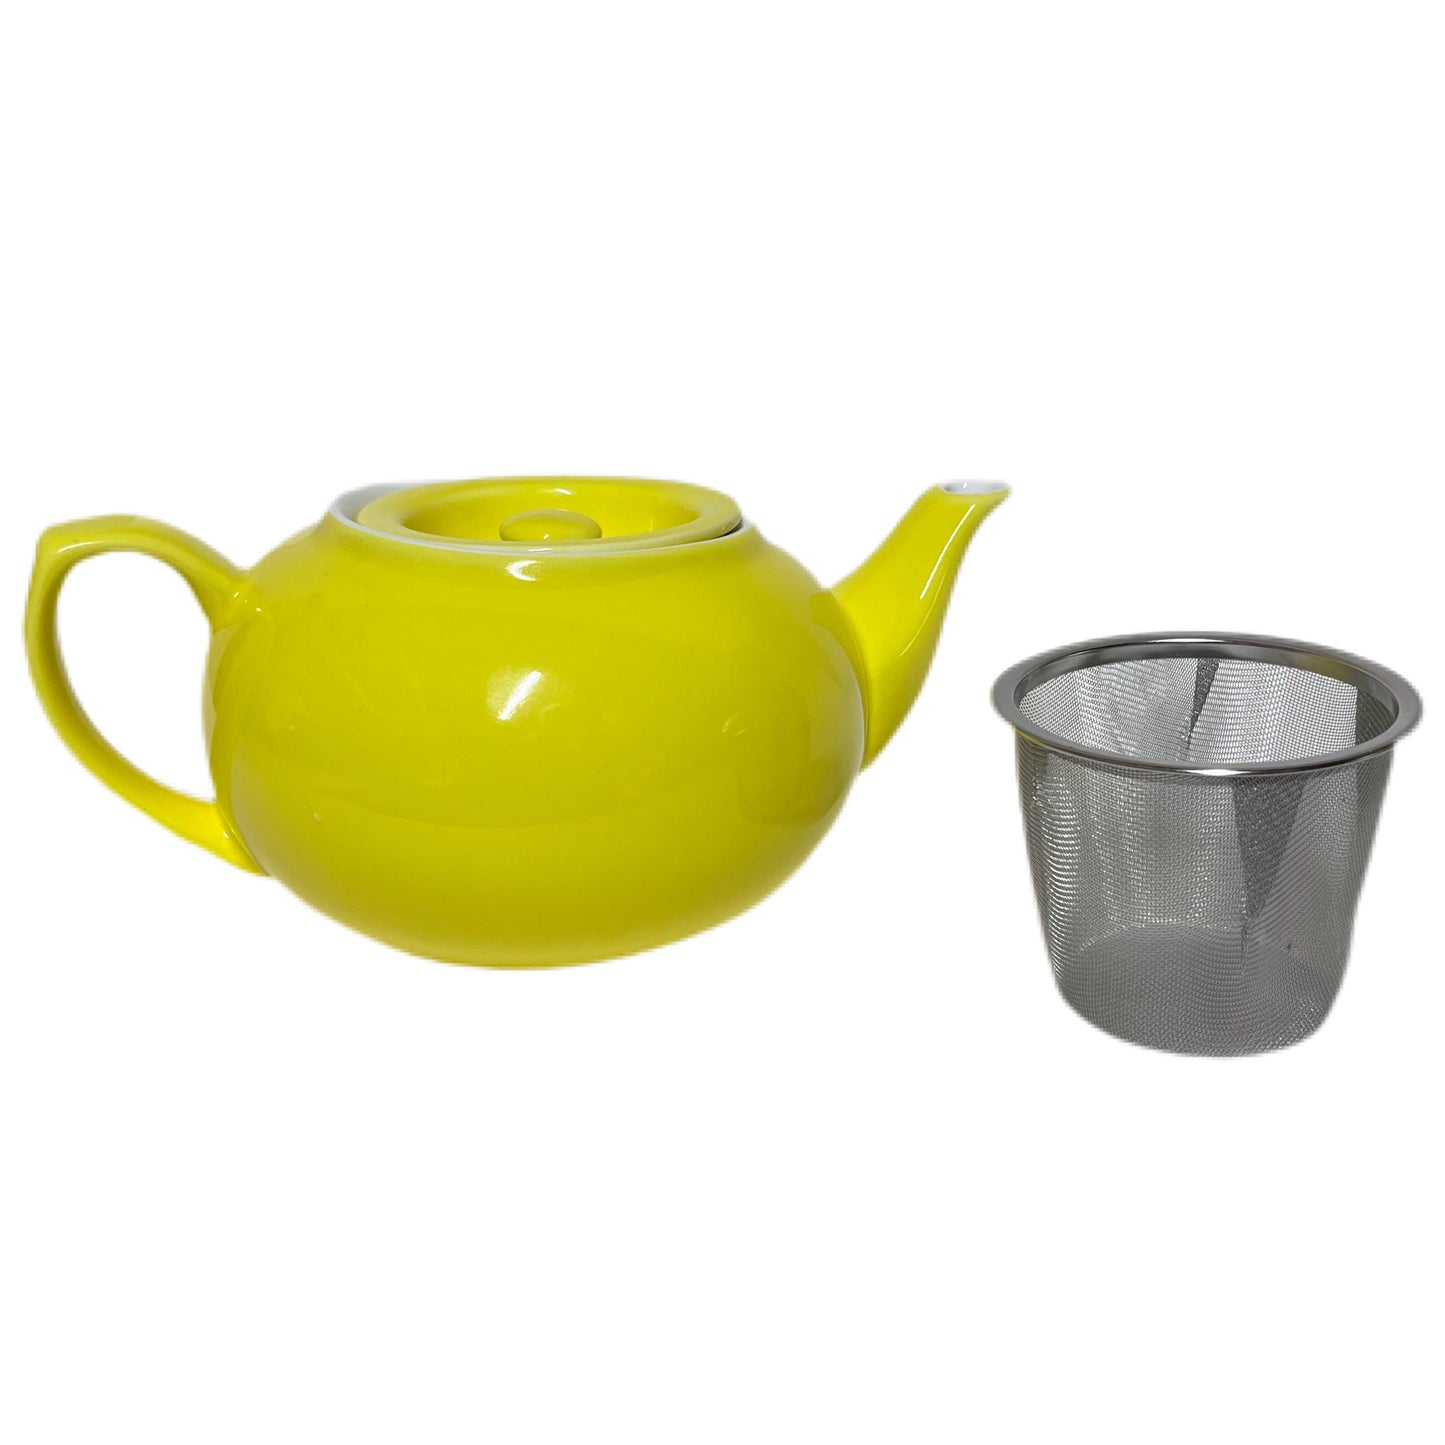 Porcelain Teapot and infuser